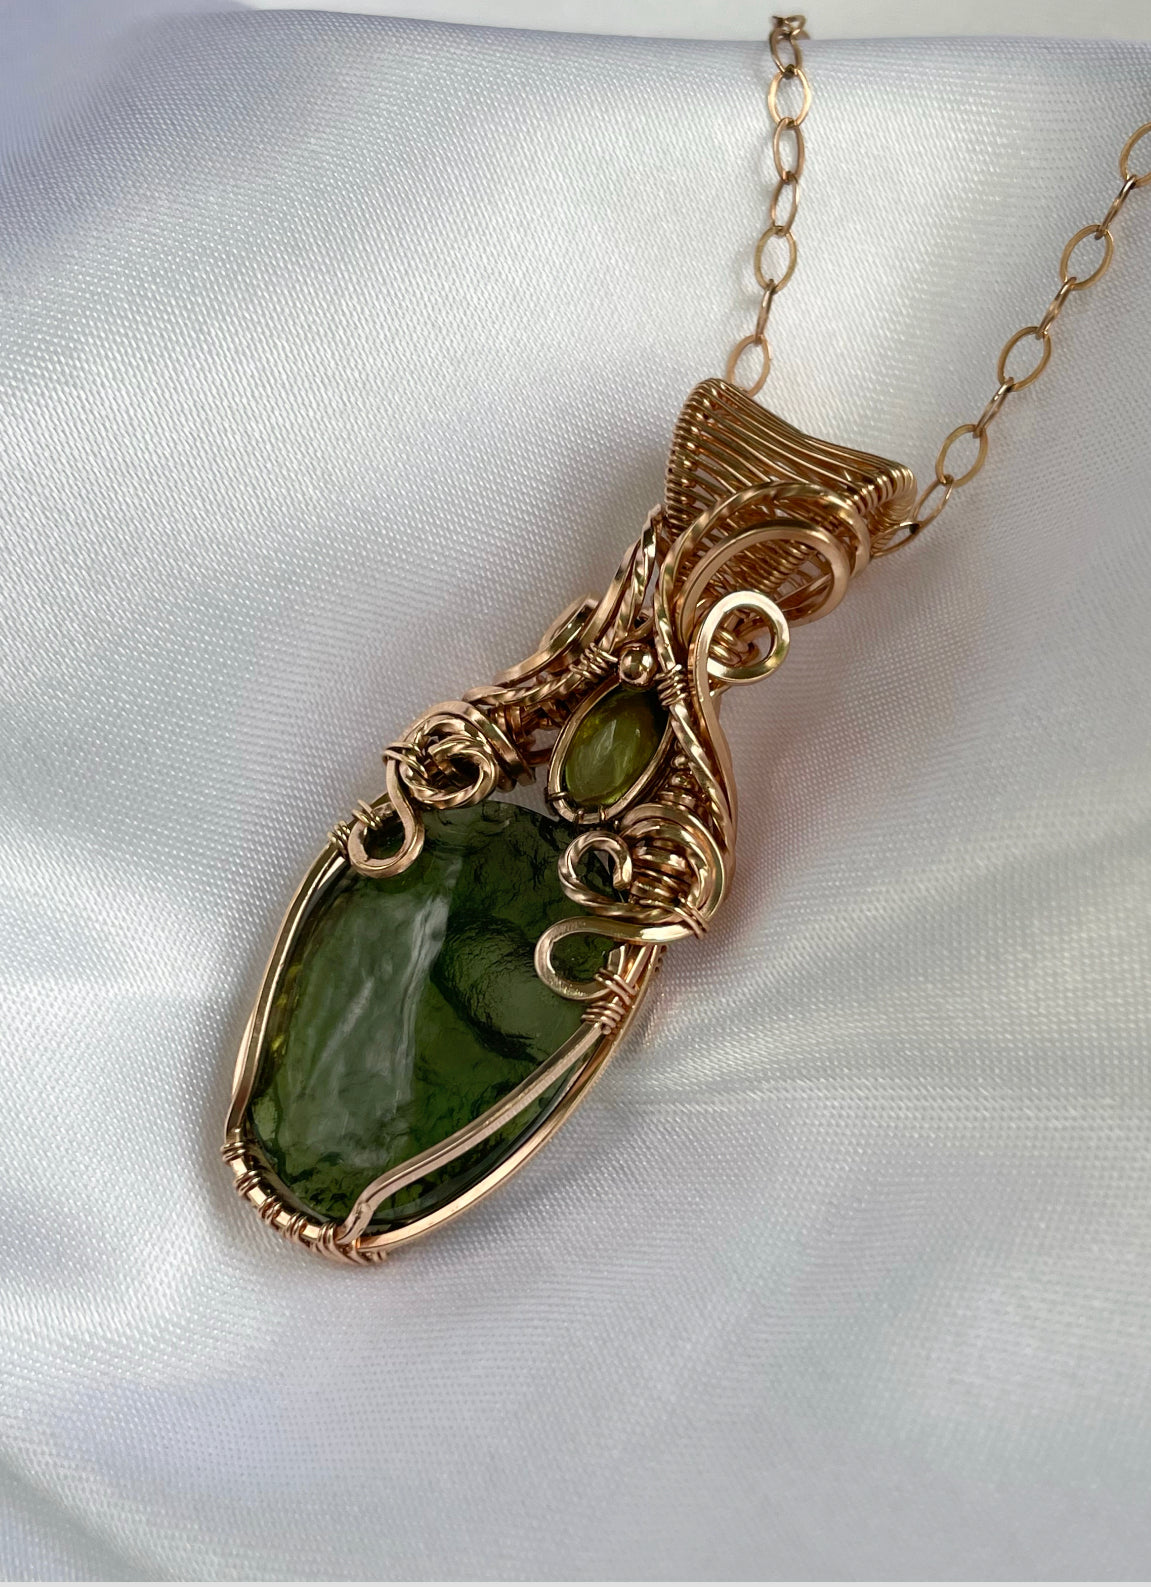 Rare Moldavite (from the Czech Republic), Peridot Necklace in 14k Rose Gold Filled